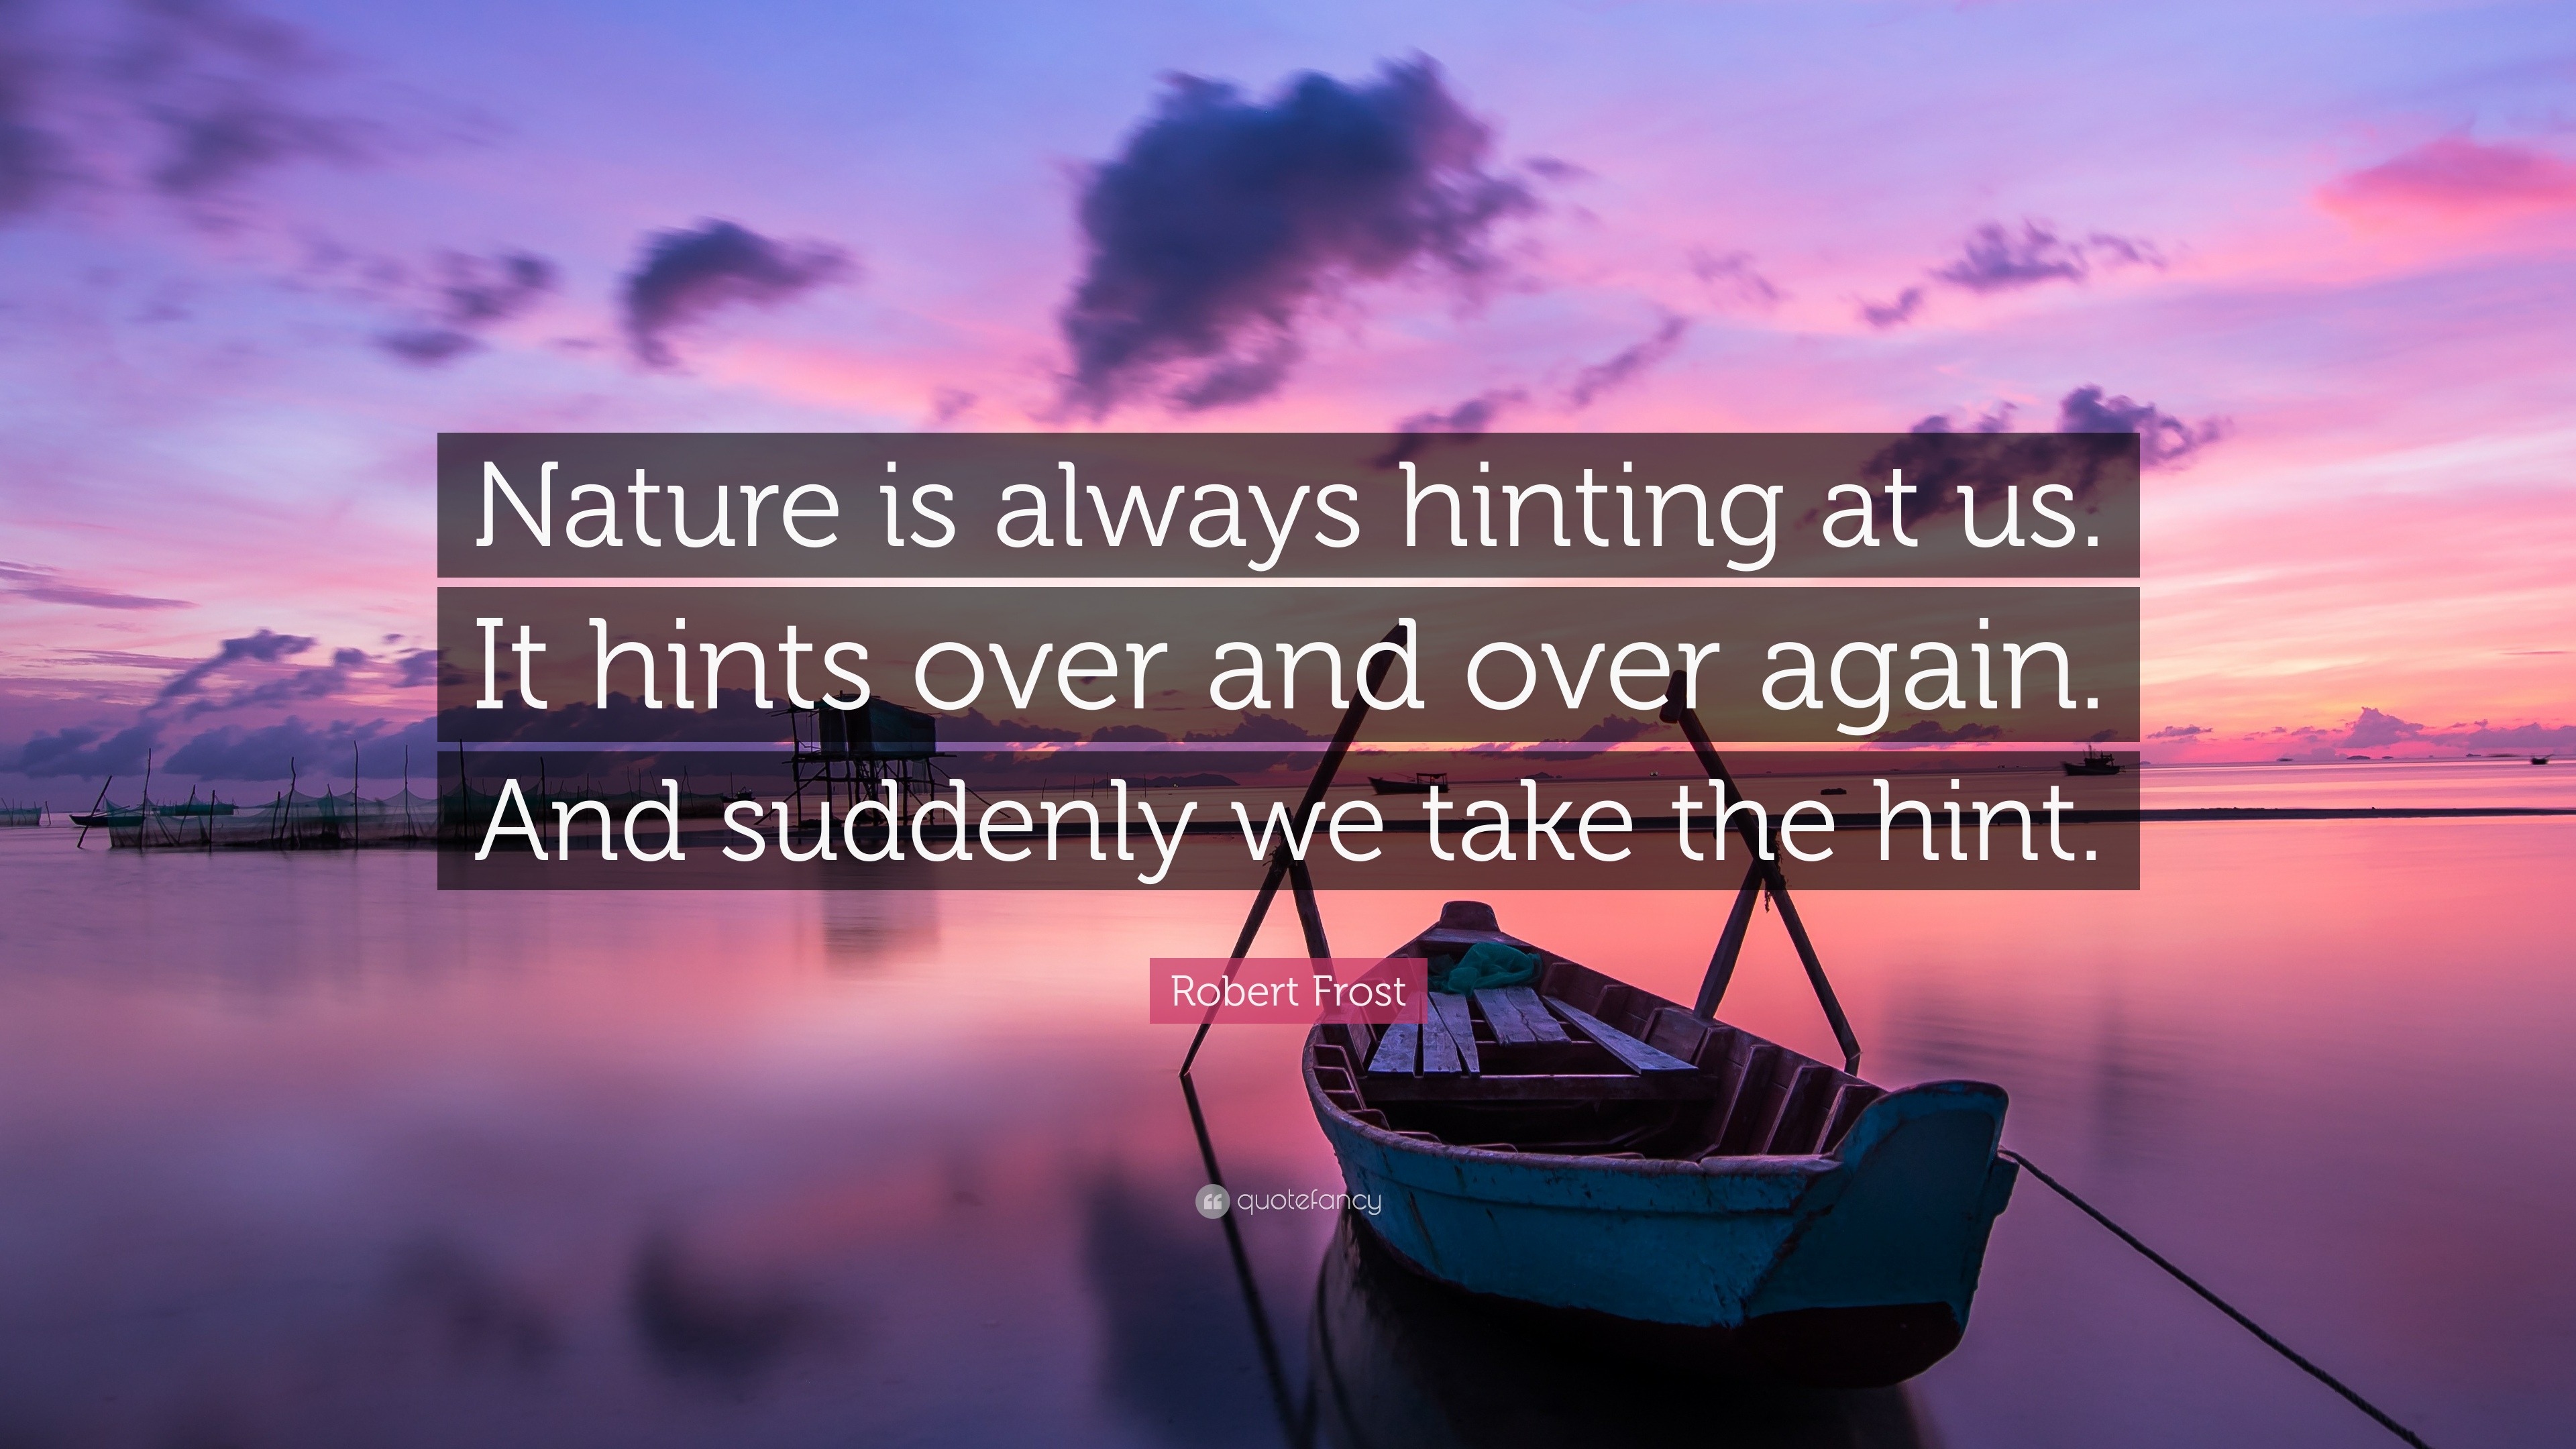 Robert Frost Quote: “Nature is always hinting at us. It hints over and ...